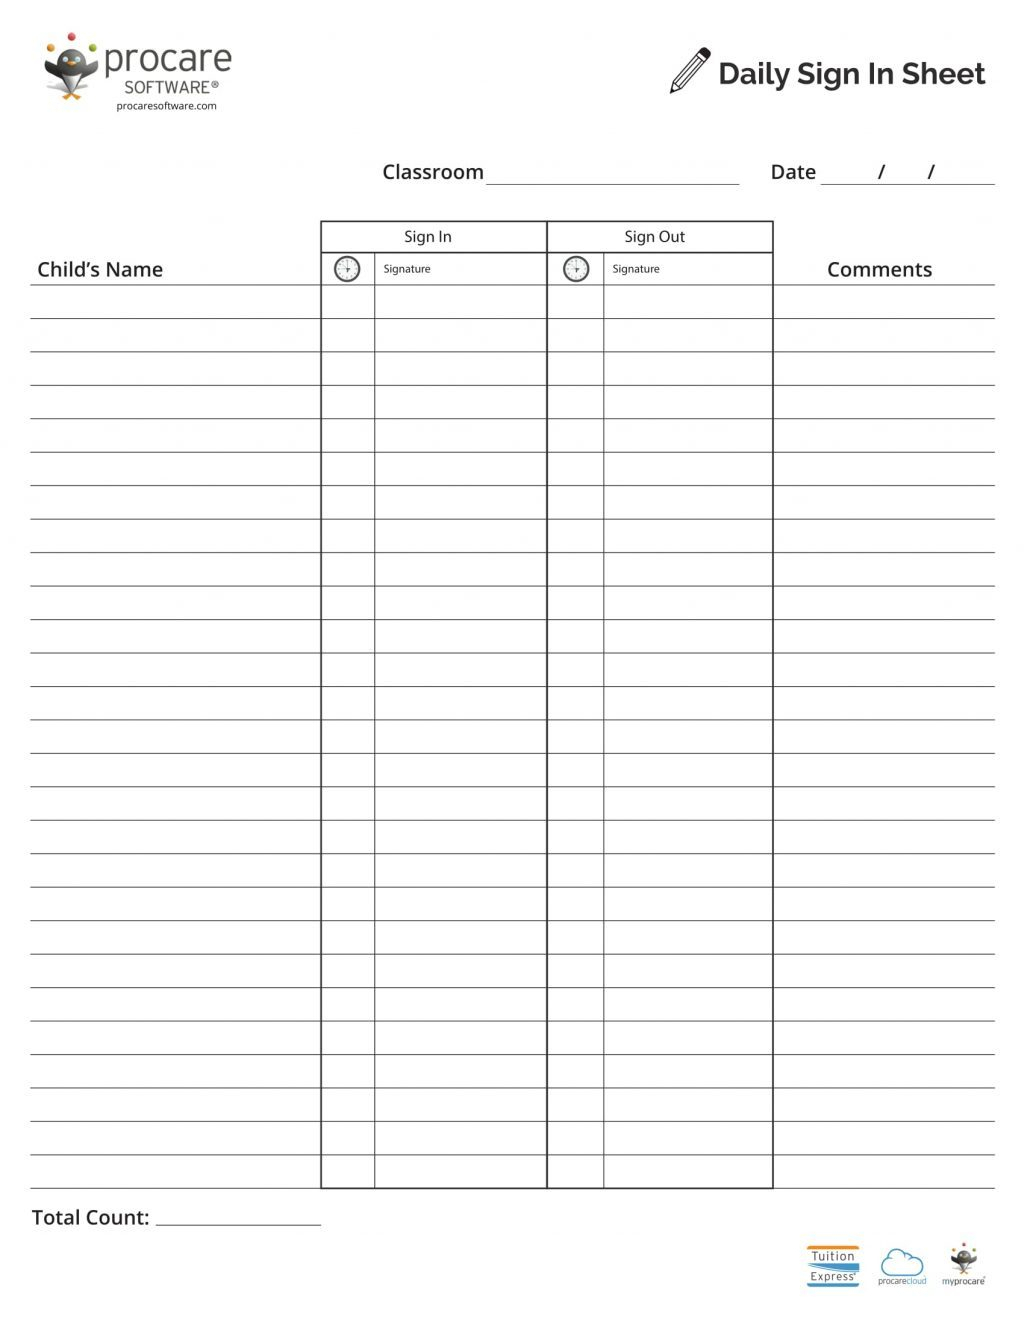 daycare-payment-spreadsheet-template-db-excel